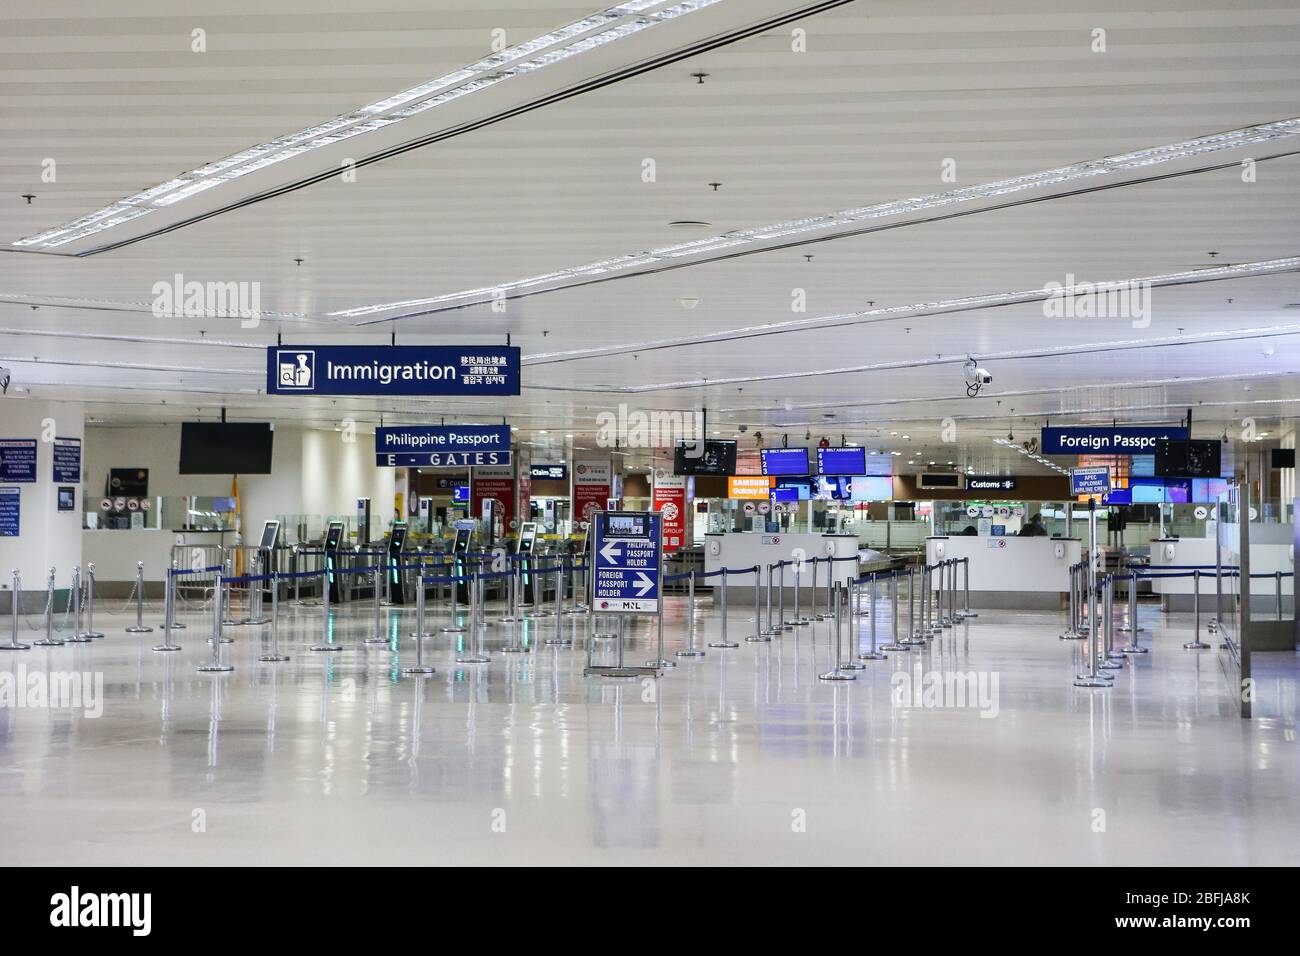 Paranaque City, Philippines. 19th Apr, 2020. The passenger arrival area of the Manila Ninoy Aquino International Airport (NAIA) terminal 1 remains empty as air traffic scale-down continues due to the COVID-19 pandemic in Paranaque City, the Philippines, on April 19, 2020. The Department of Health (DOH) of the Philippines reported on Sunday 172 new confirmed COVID-19 cases, bringing the total number in the country to 6,259. According to the DOH, 12 patients have died, bringing the death toll to 409. Credit: Rouelle Umali/Xinhua/Alamy Live News Stock Photo